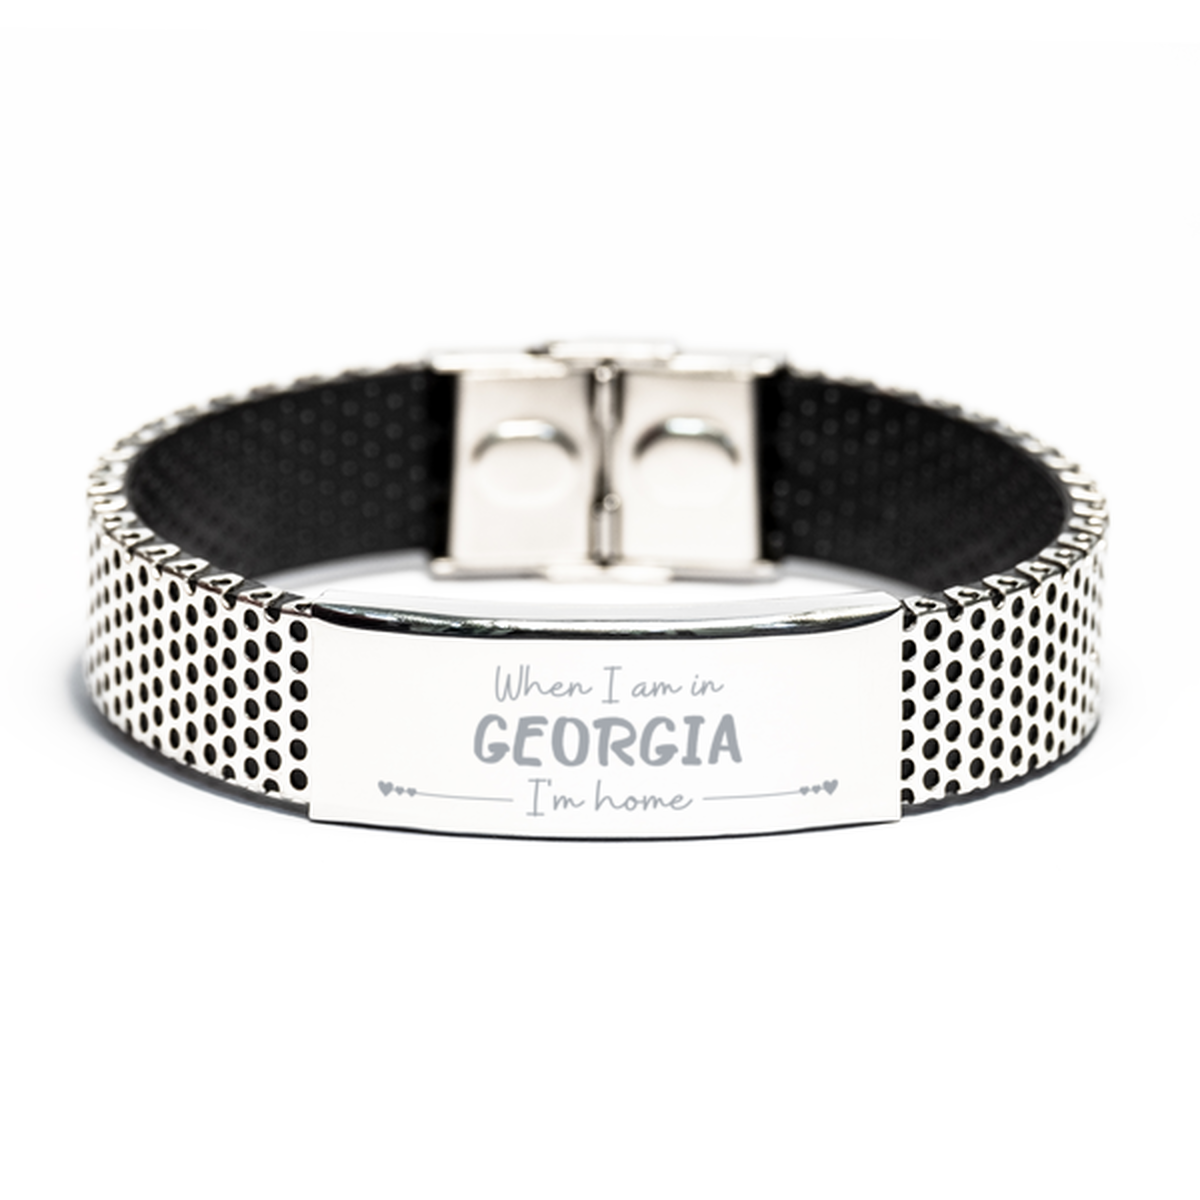 When I am in Georgia I'm home Stainless Steel Bracelet, Cheap Gifts For Georgia, State Georgia Birthday Gifts for Friends Coworker